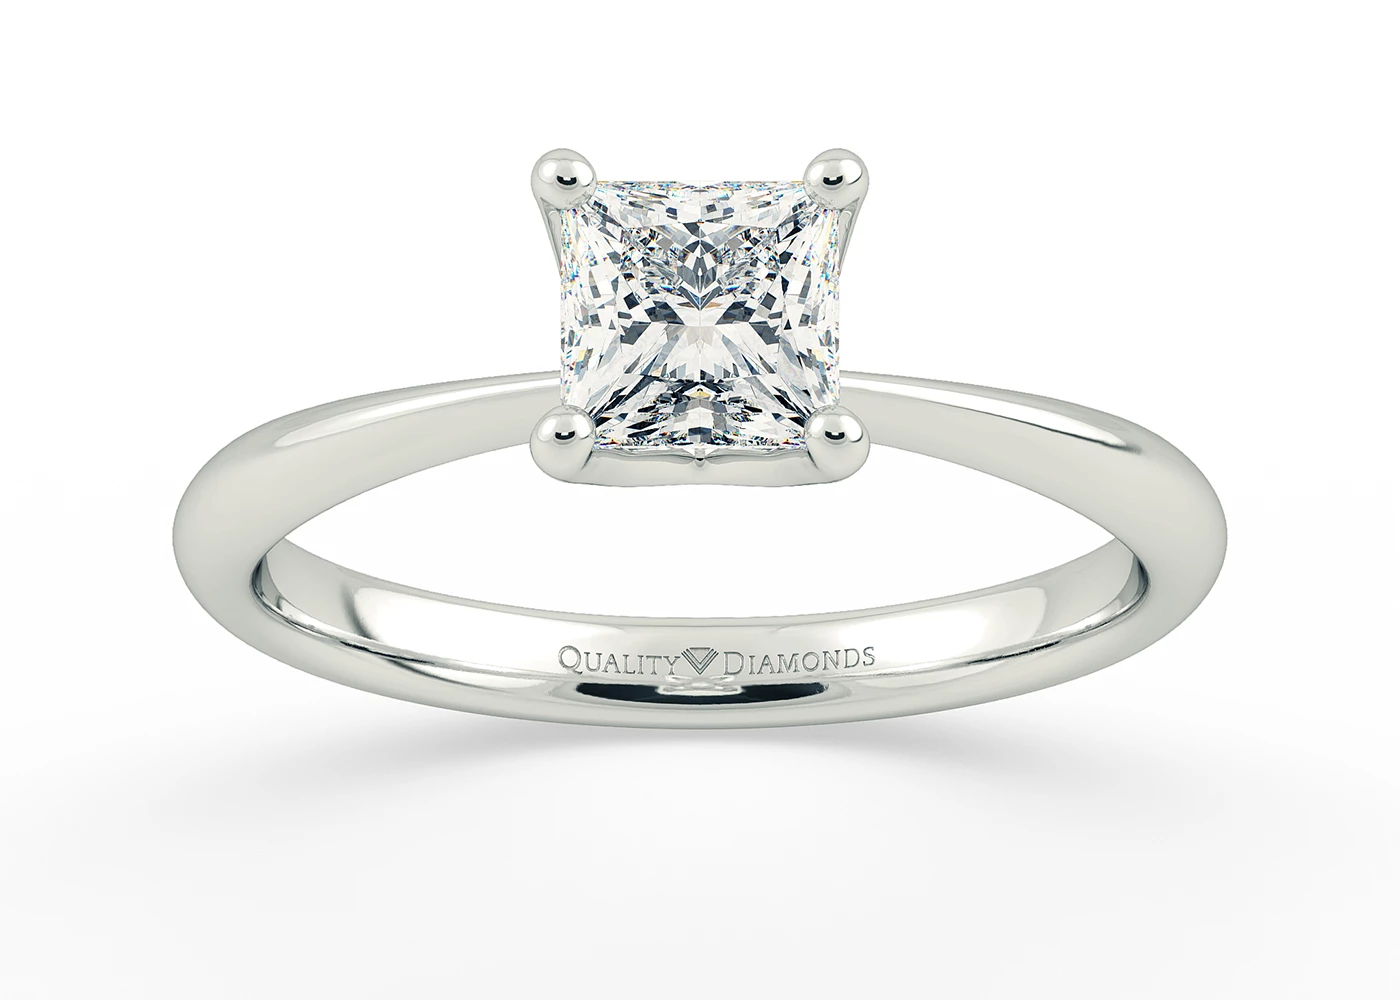 Two Carat Lab Grown Princess Solitaire Diamond Engagement Ring in Platinum 950